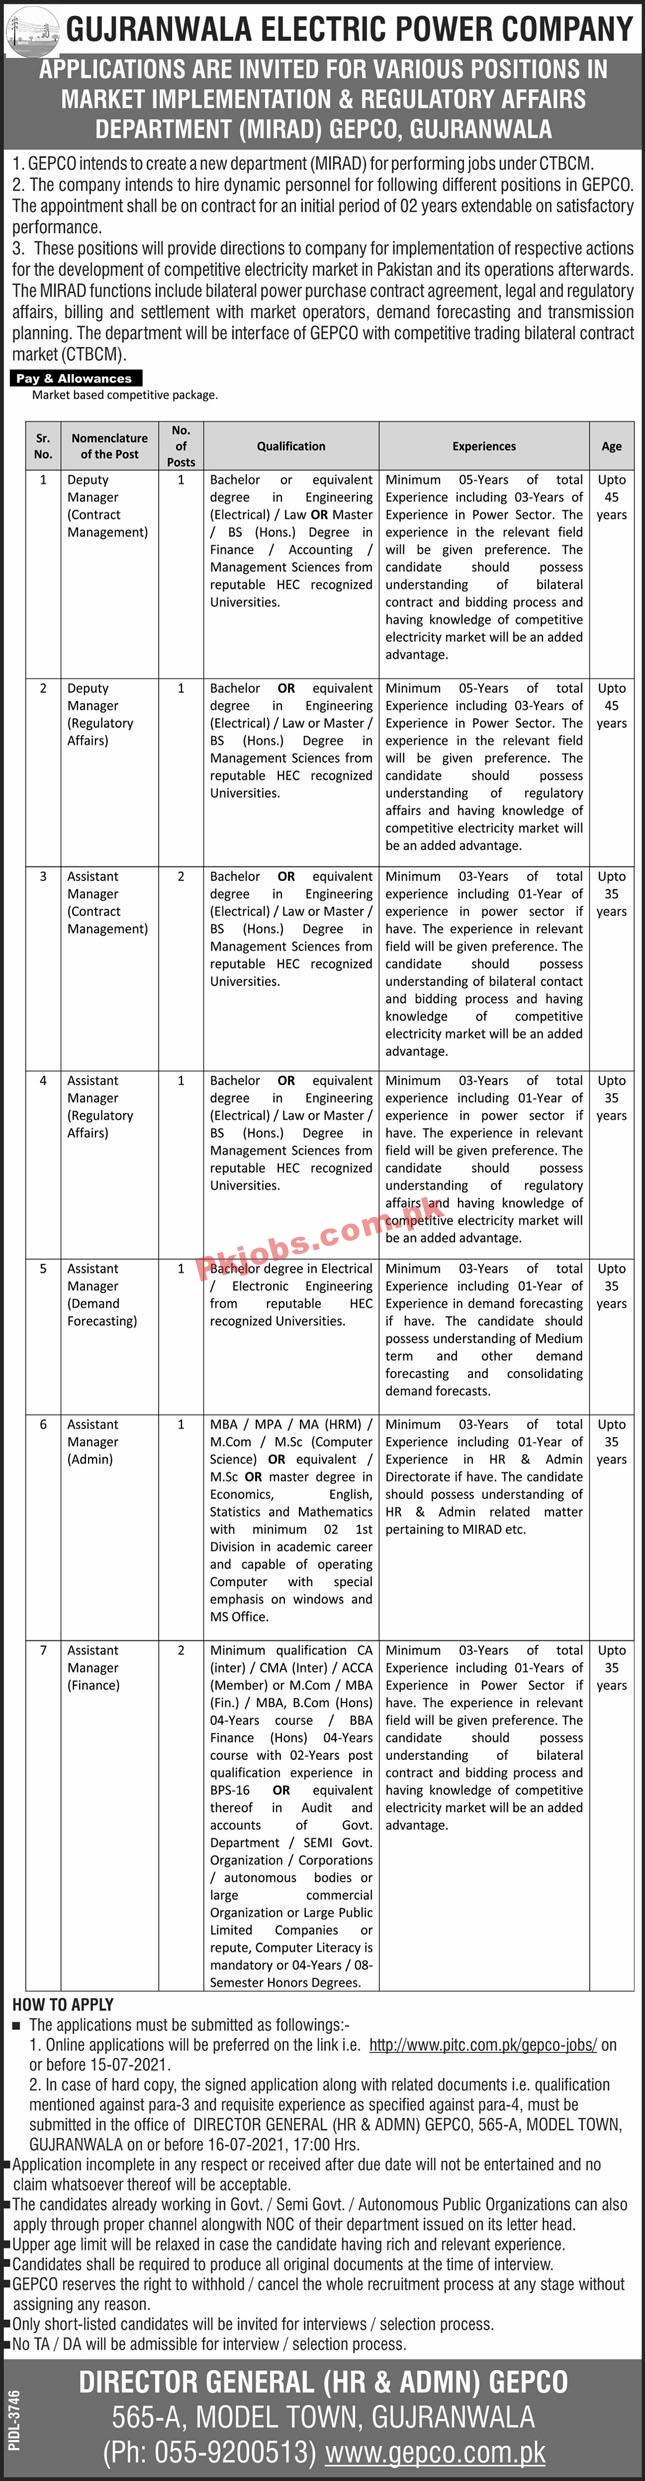 Jobs in Gujranwala Electric Power Company GEPCO